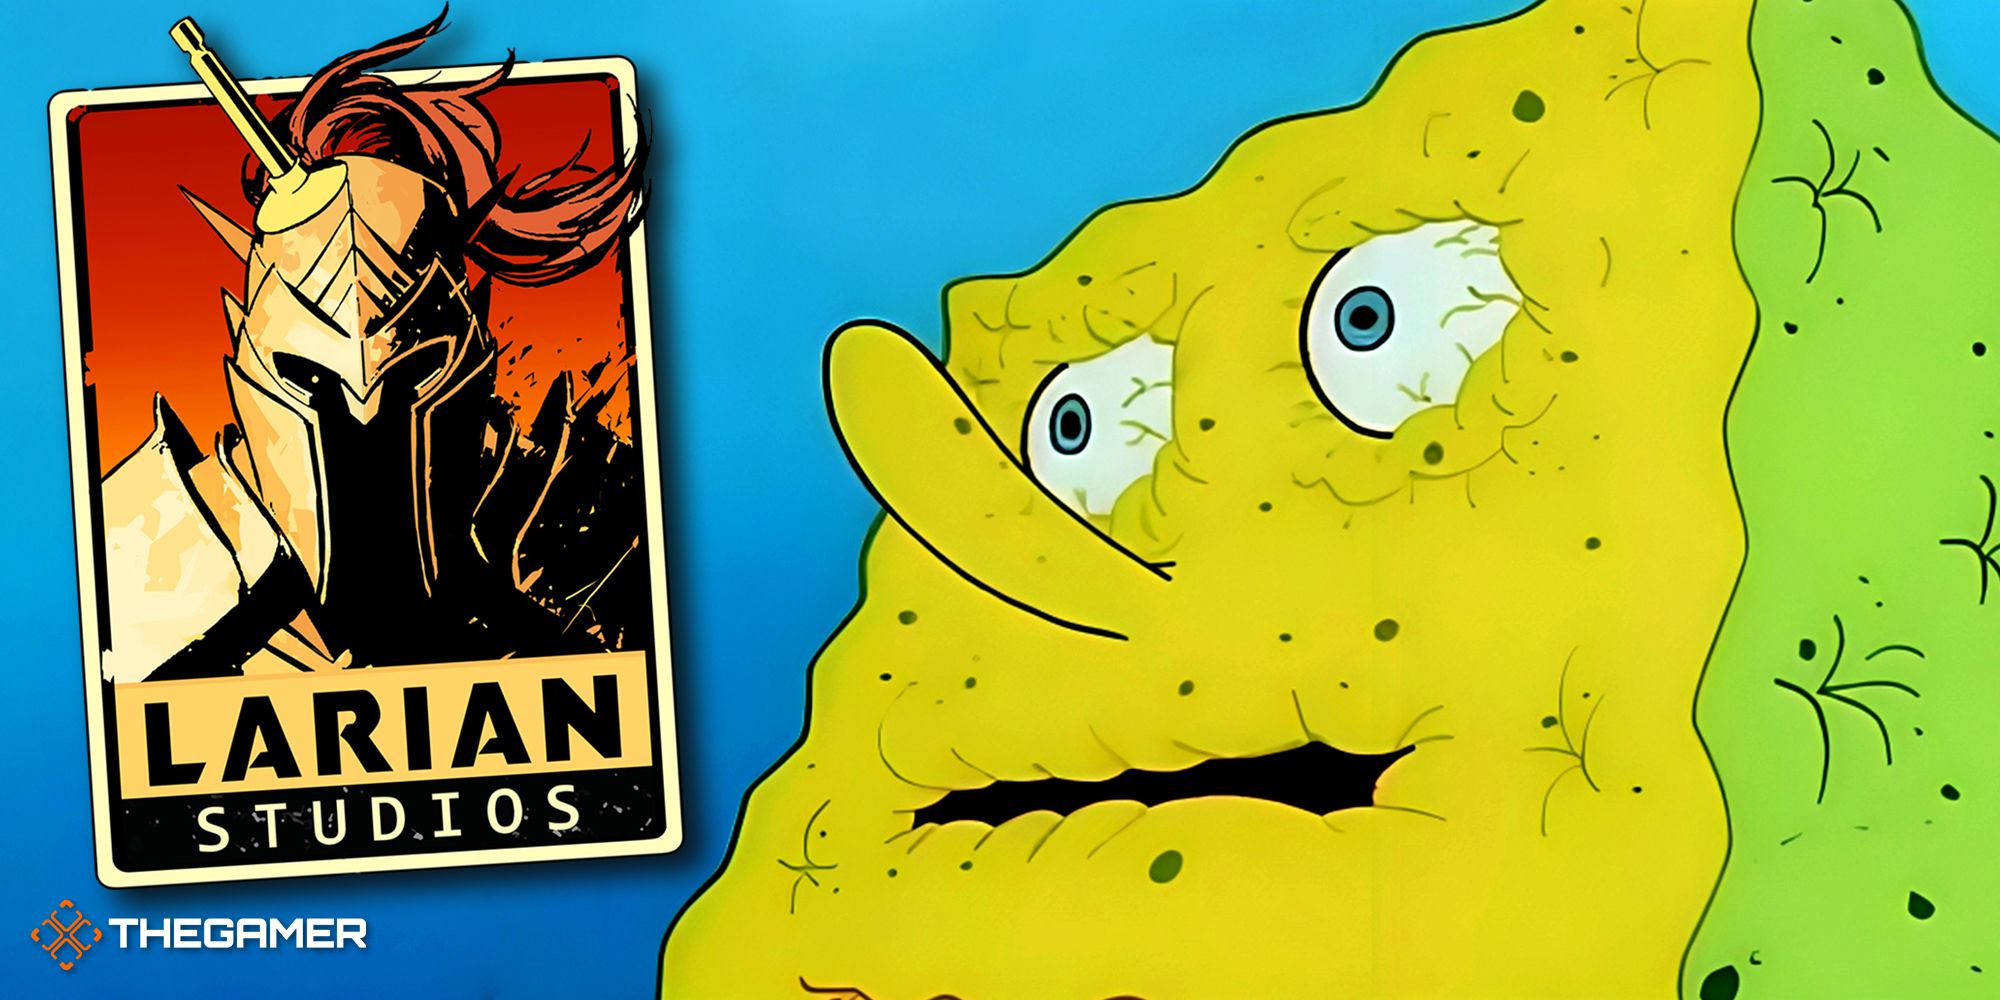 Split image with the Larian logo on the left and dehydrated Spongebob Squarepants on the right.